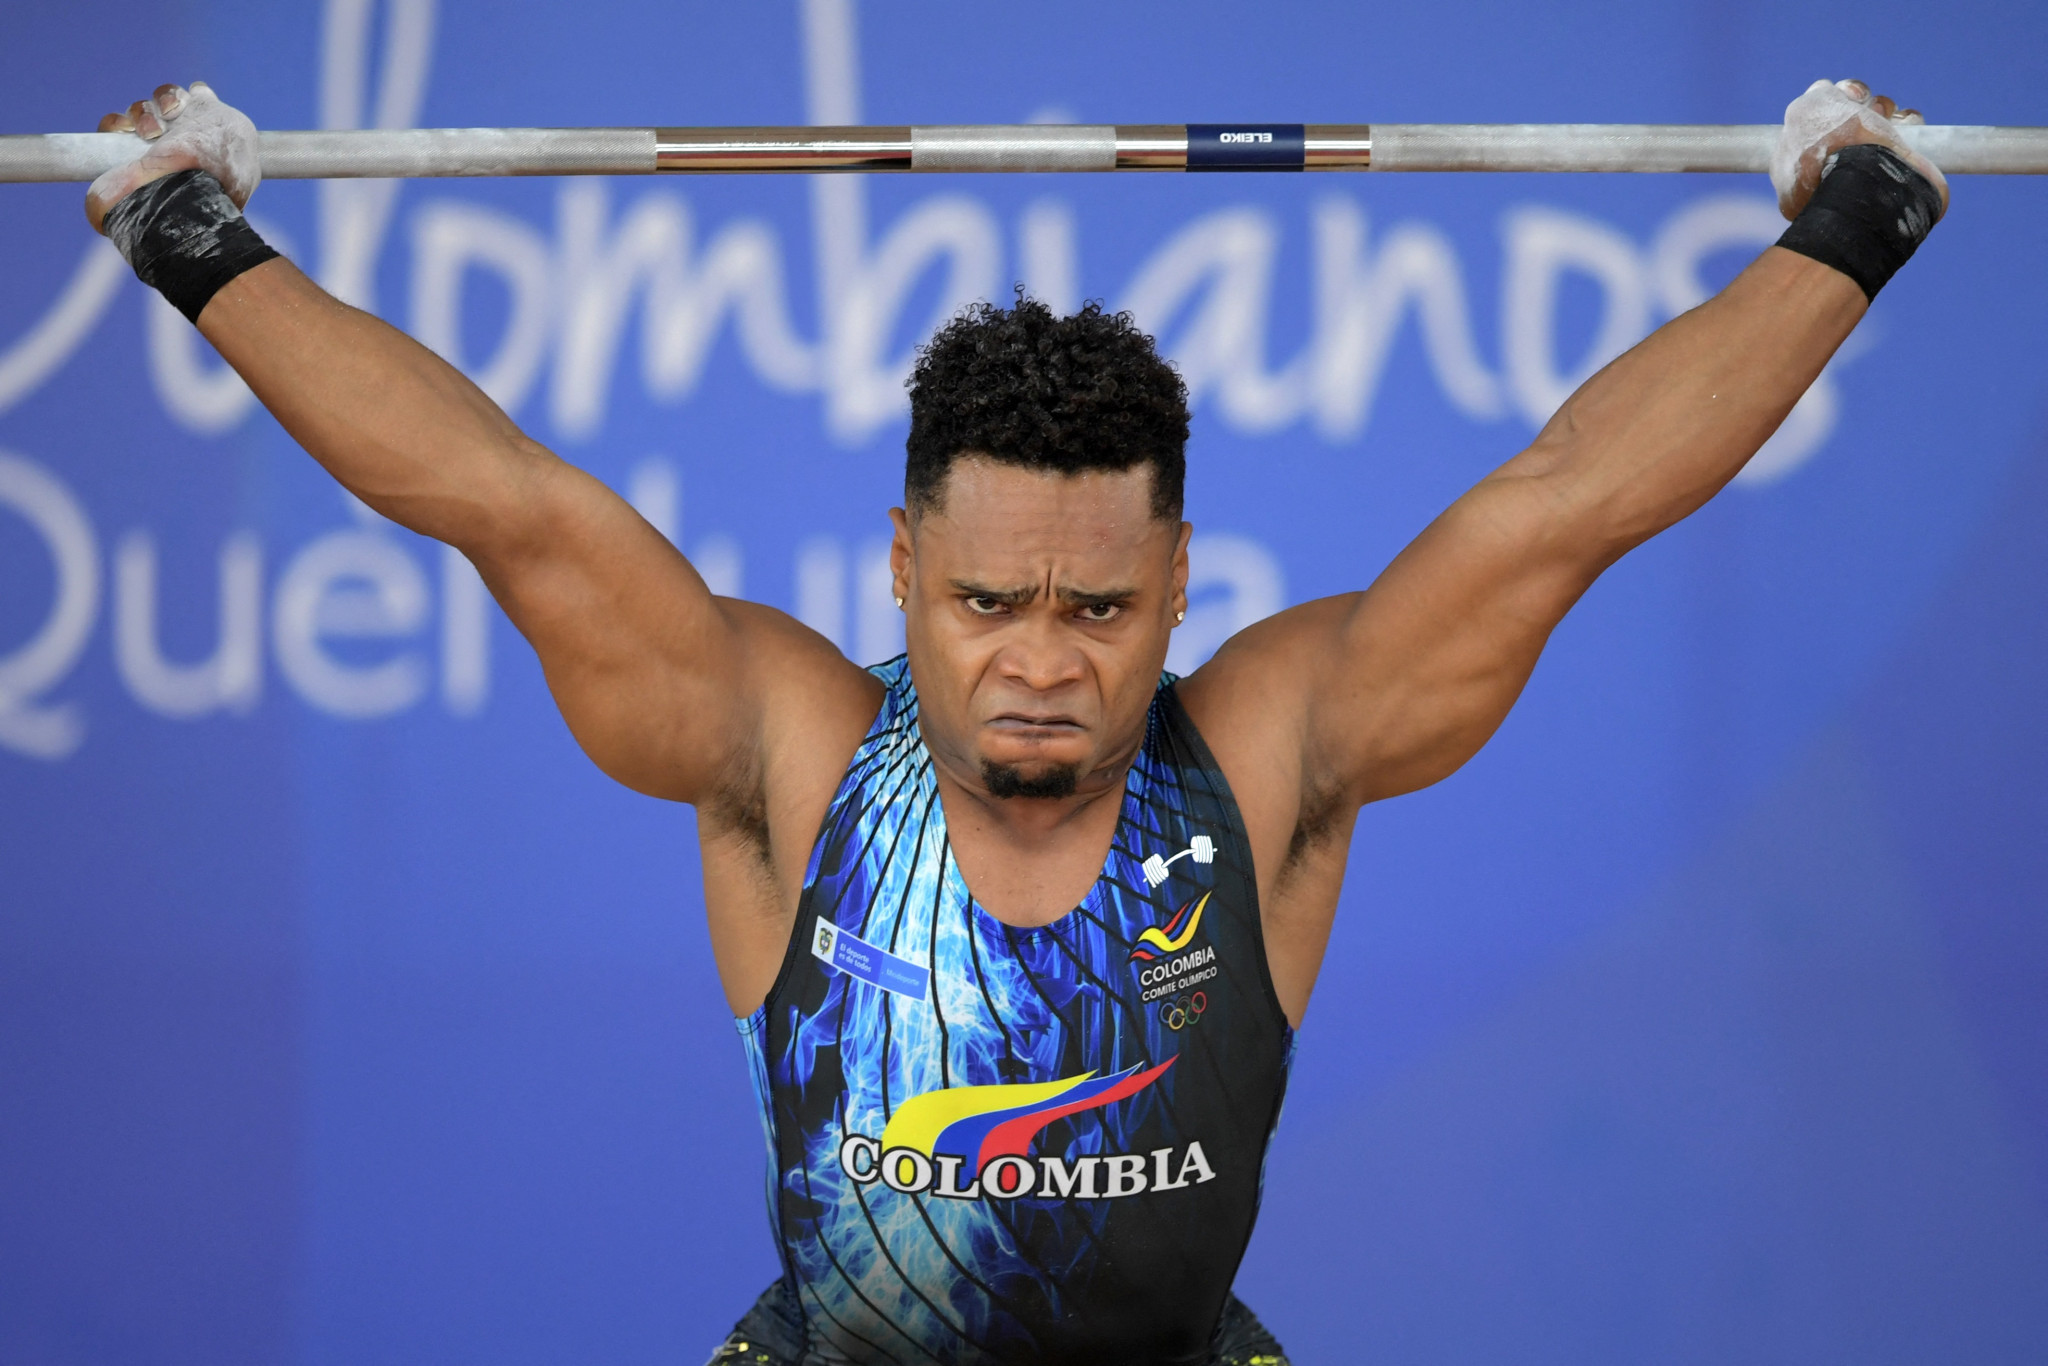 Colombian weightlifting champion Francisco Mosquera provisionally suspended for doping